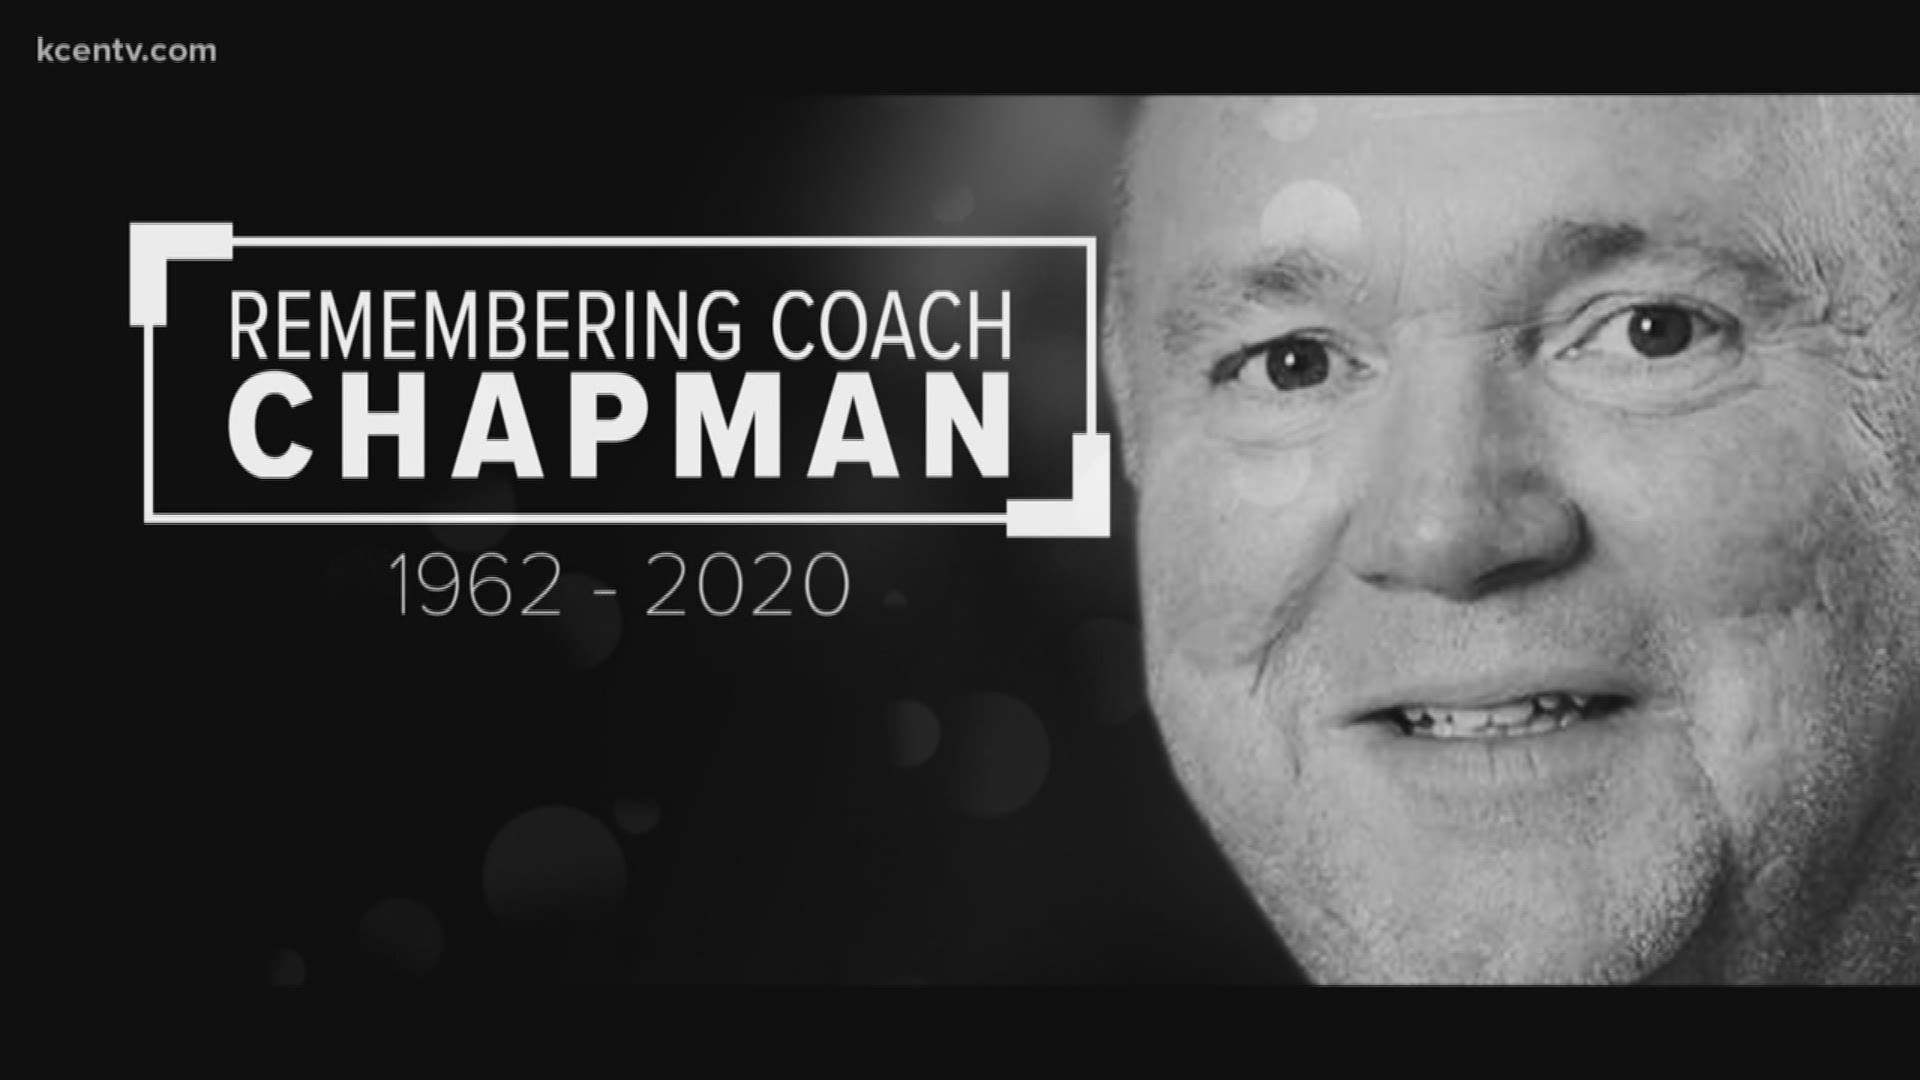 Waco ISD Stadium was filled with those who honored the life of Mike Chapman